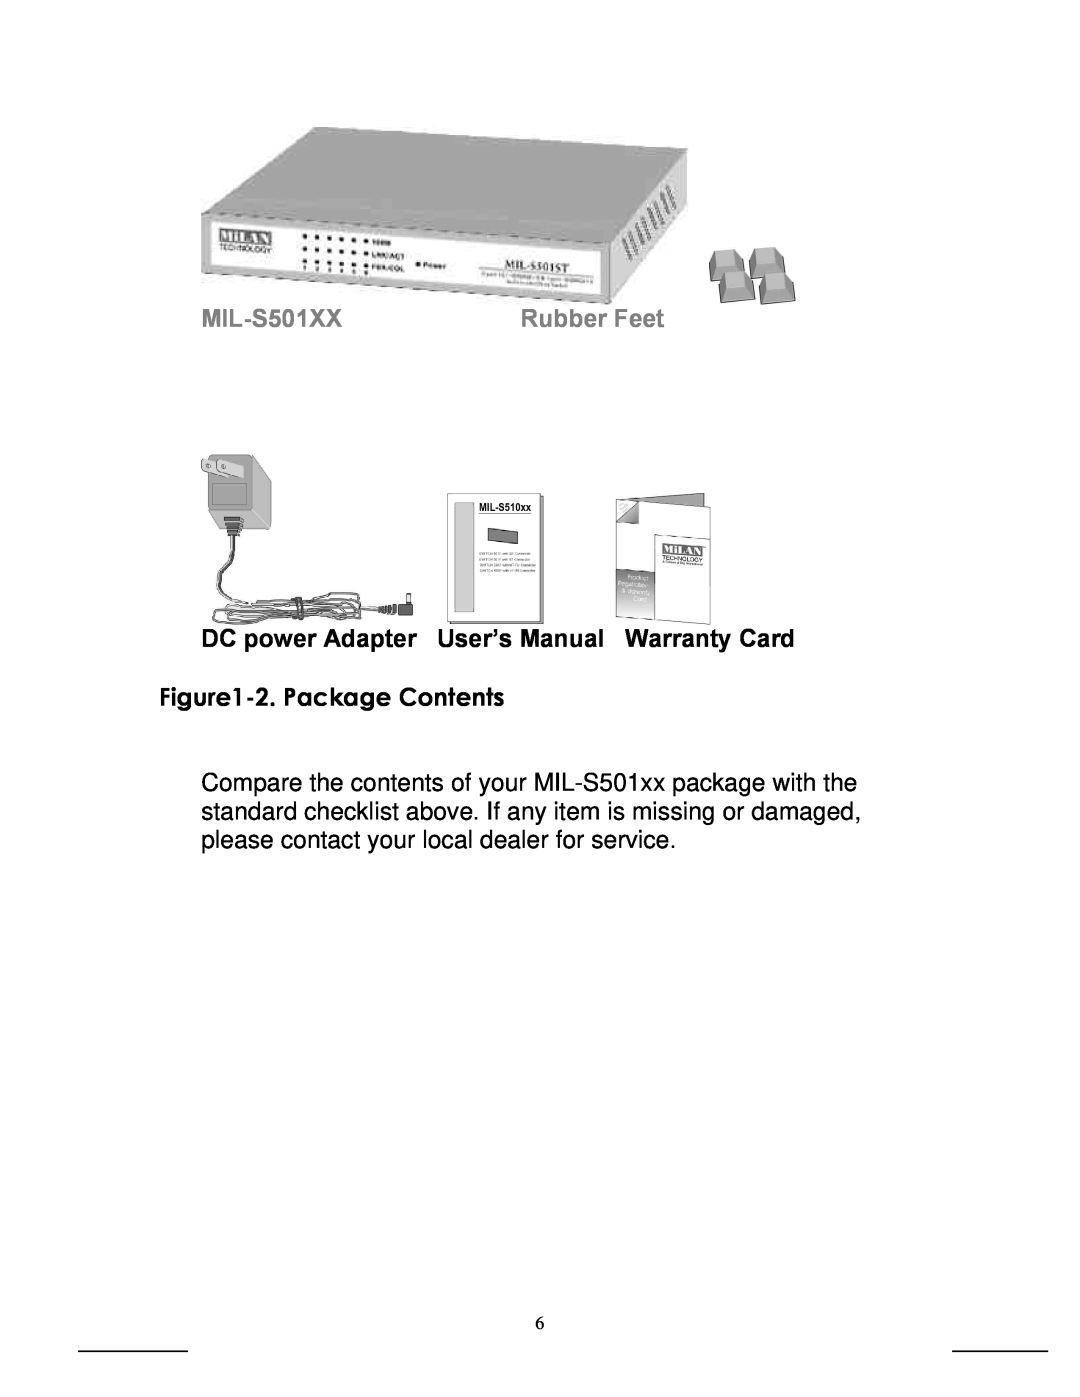 Milan Technology MIL-S501SC-70 MIL-S501XX, DC power Adapter User’s Manual Warranty Card, 2. Package Contents, Rubber Feet 